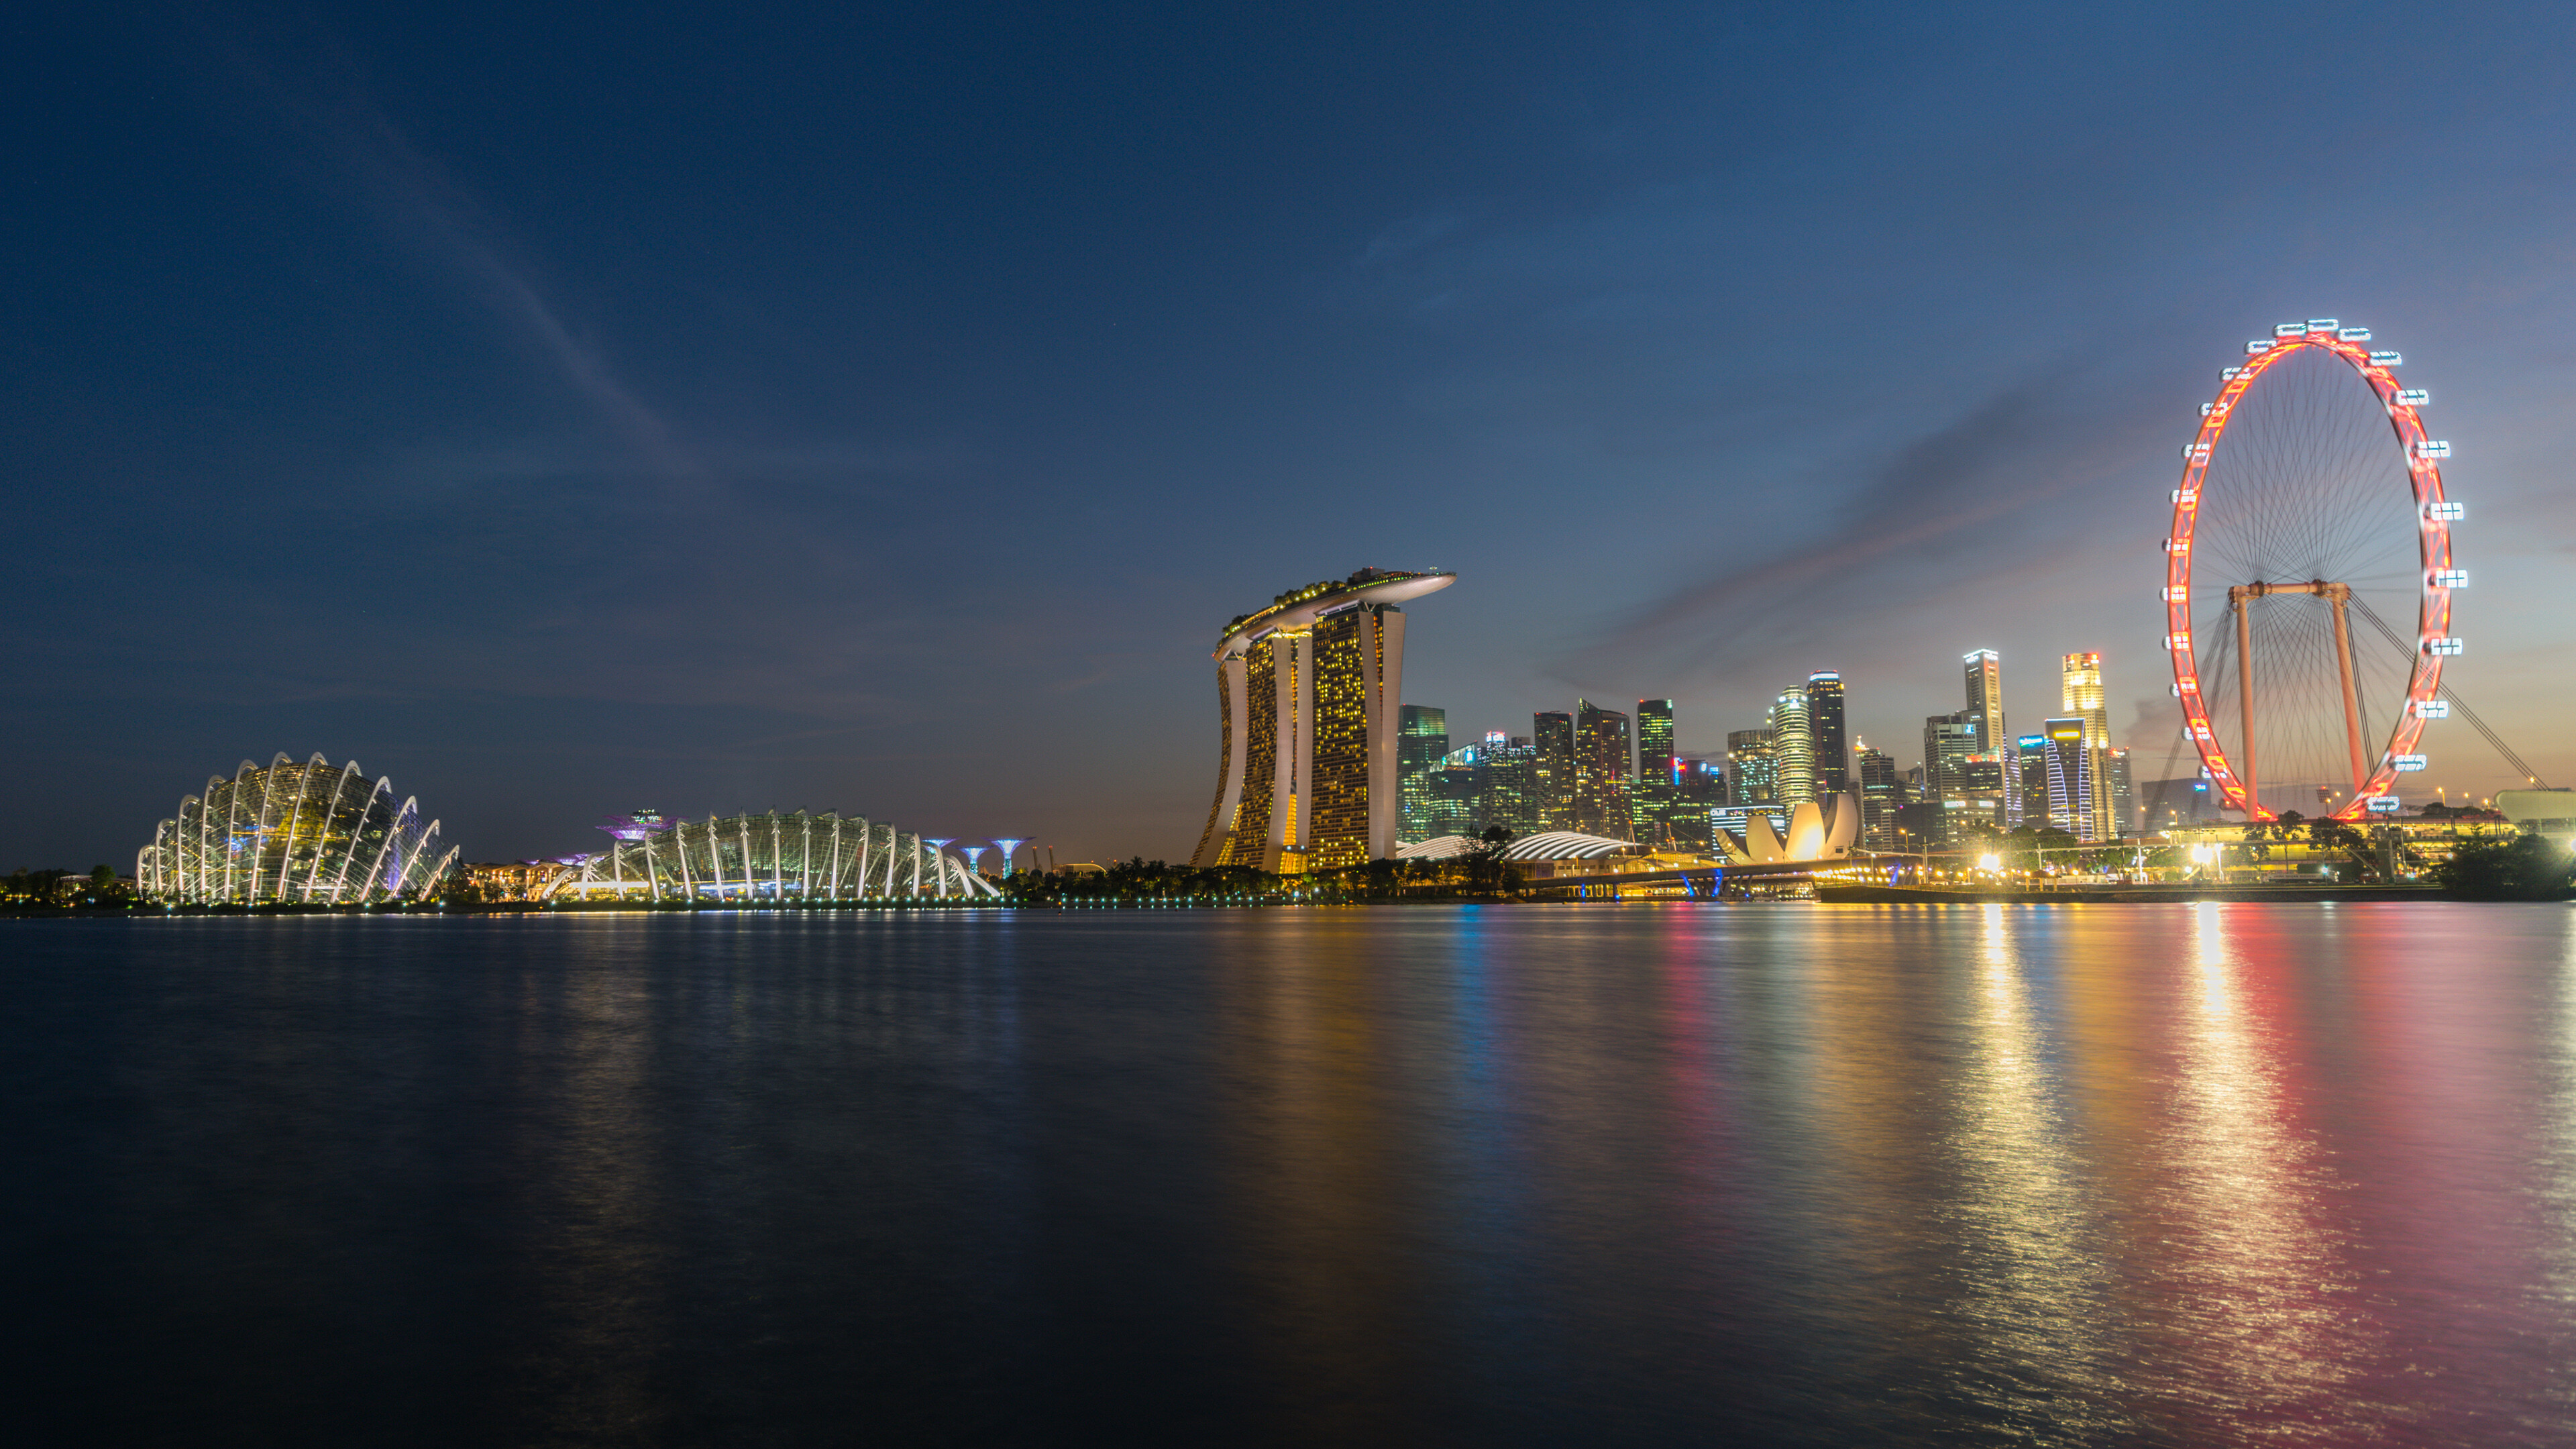 Singapore: Marina Bay Sands, The complex includes three towers topped by the Sands Skypark. 3840x2160 4K Wallpaper.